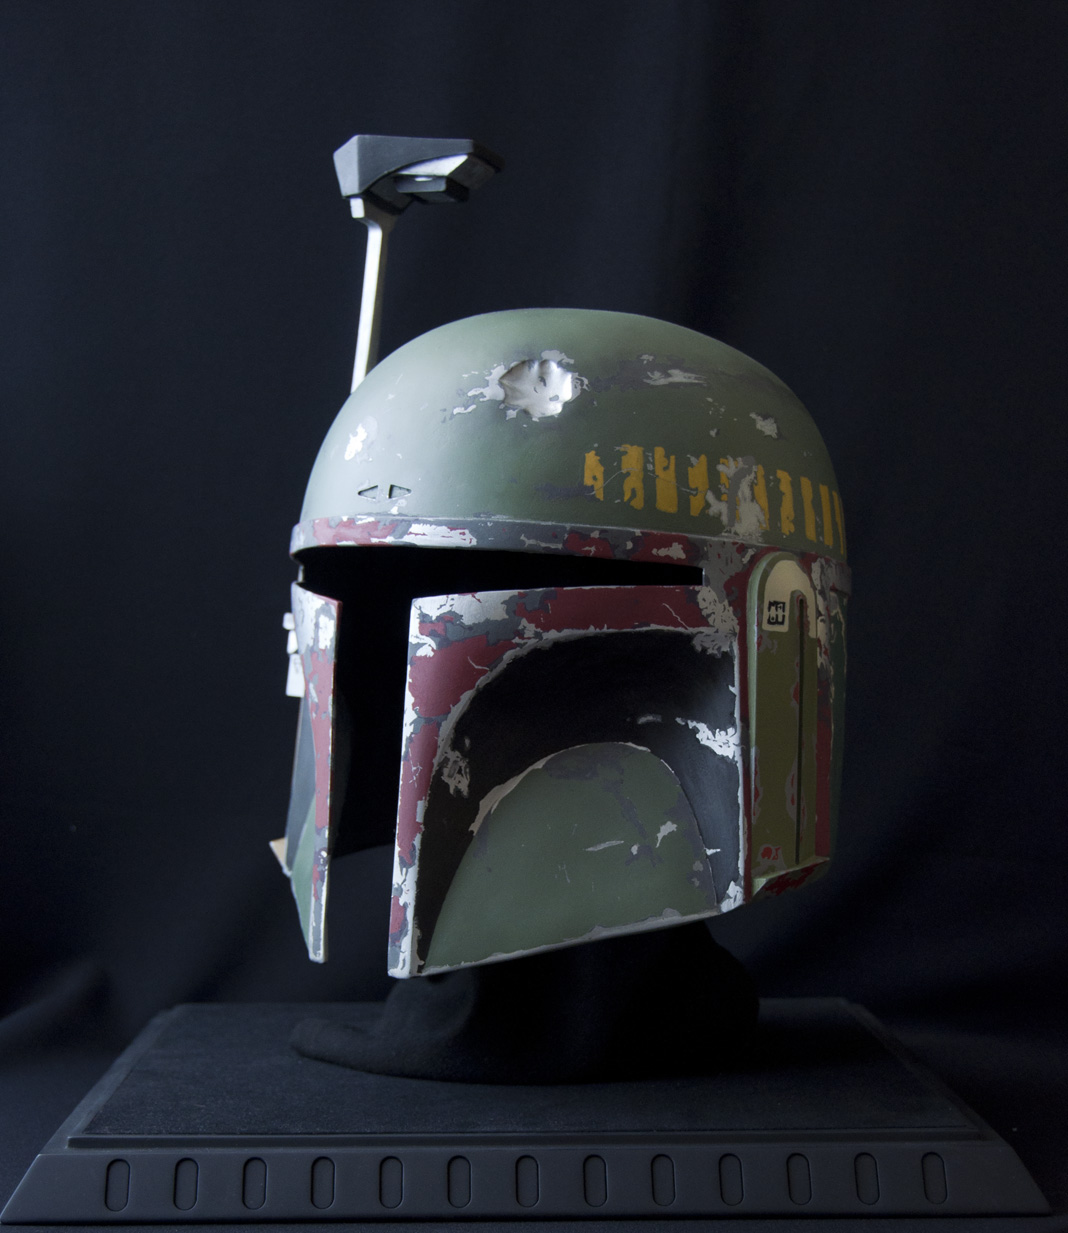 TRPN helmet (left-front view)
Painted by me